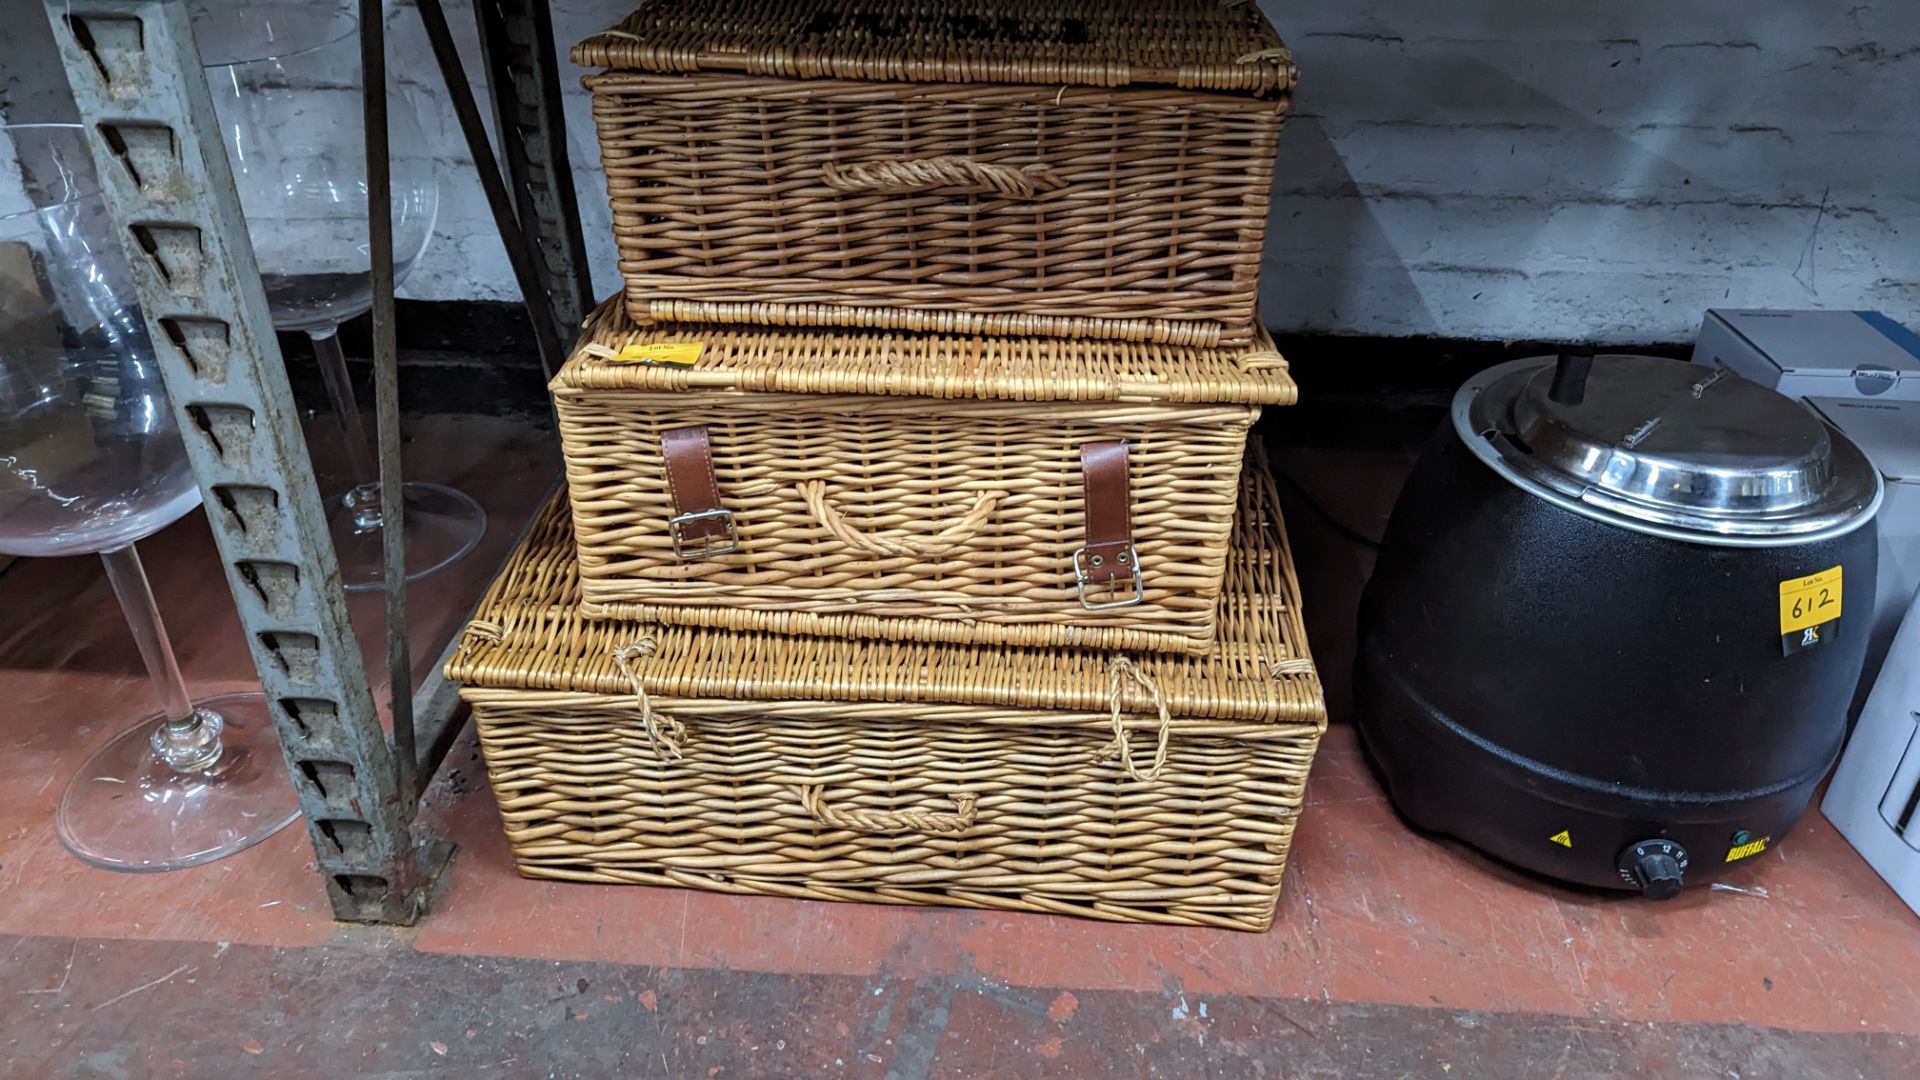 3 off assorted size picnic baskets - Image 2 of 5